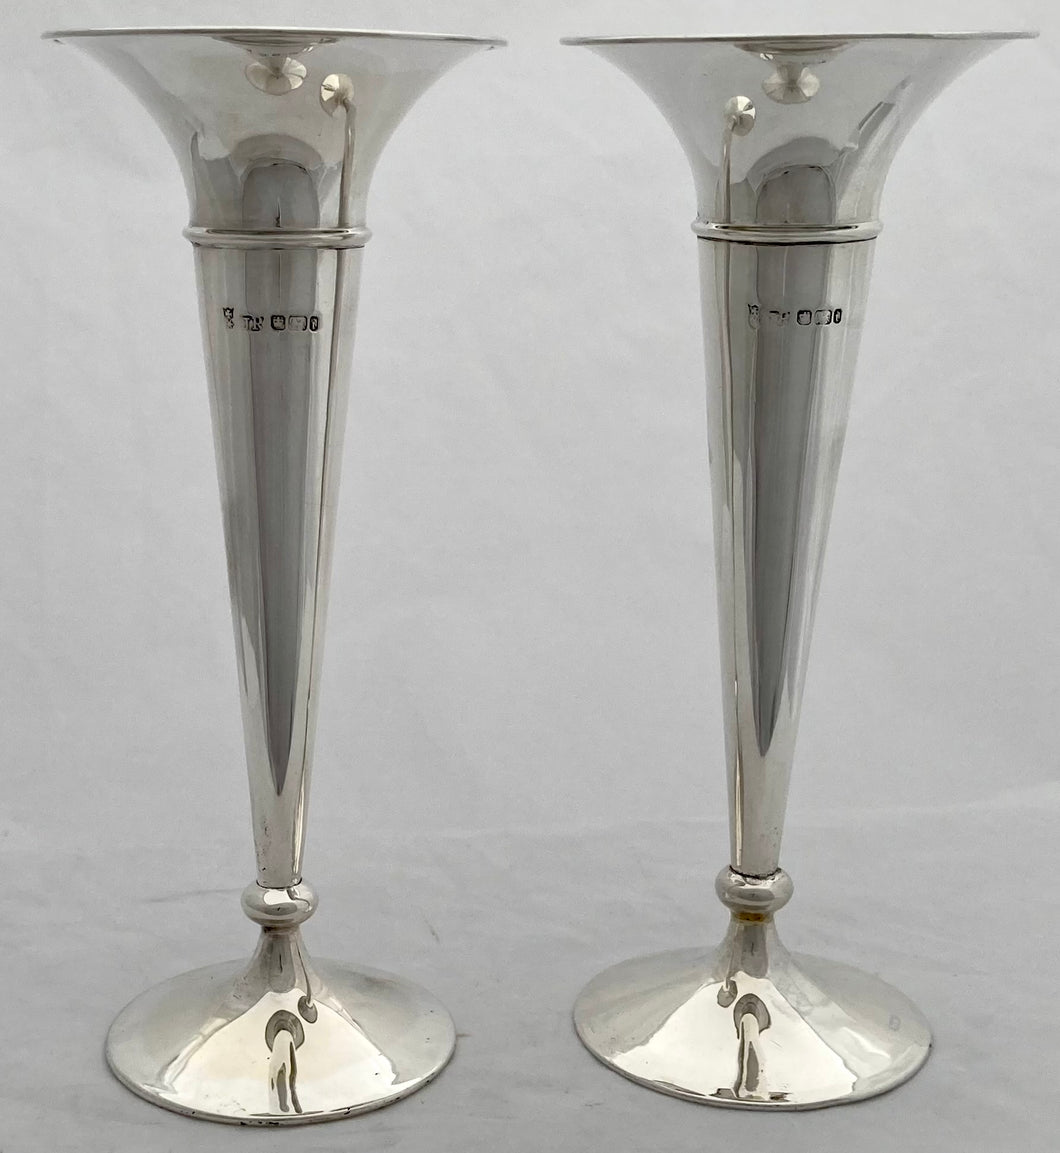 Edwardian Pair of Silver Trumpet Vases. Sheffield 1901 Joseph Rodgers & Sons.